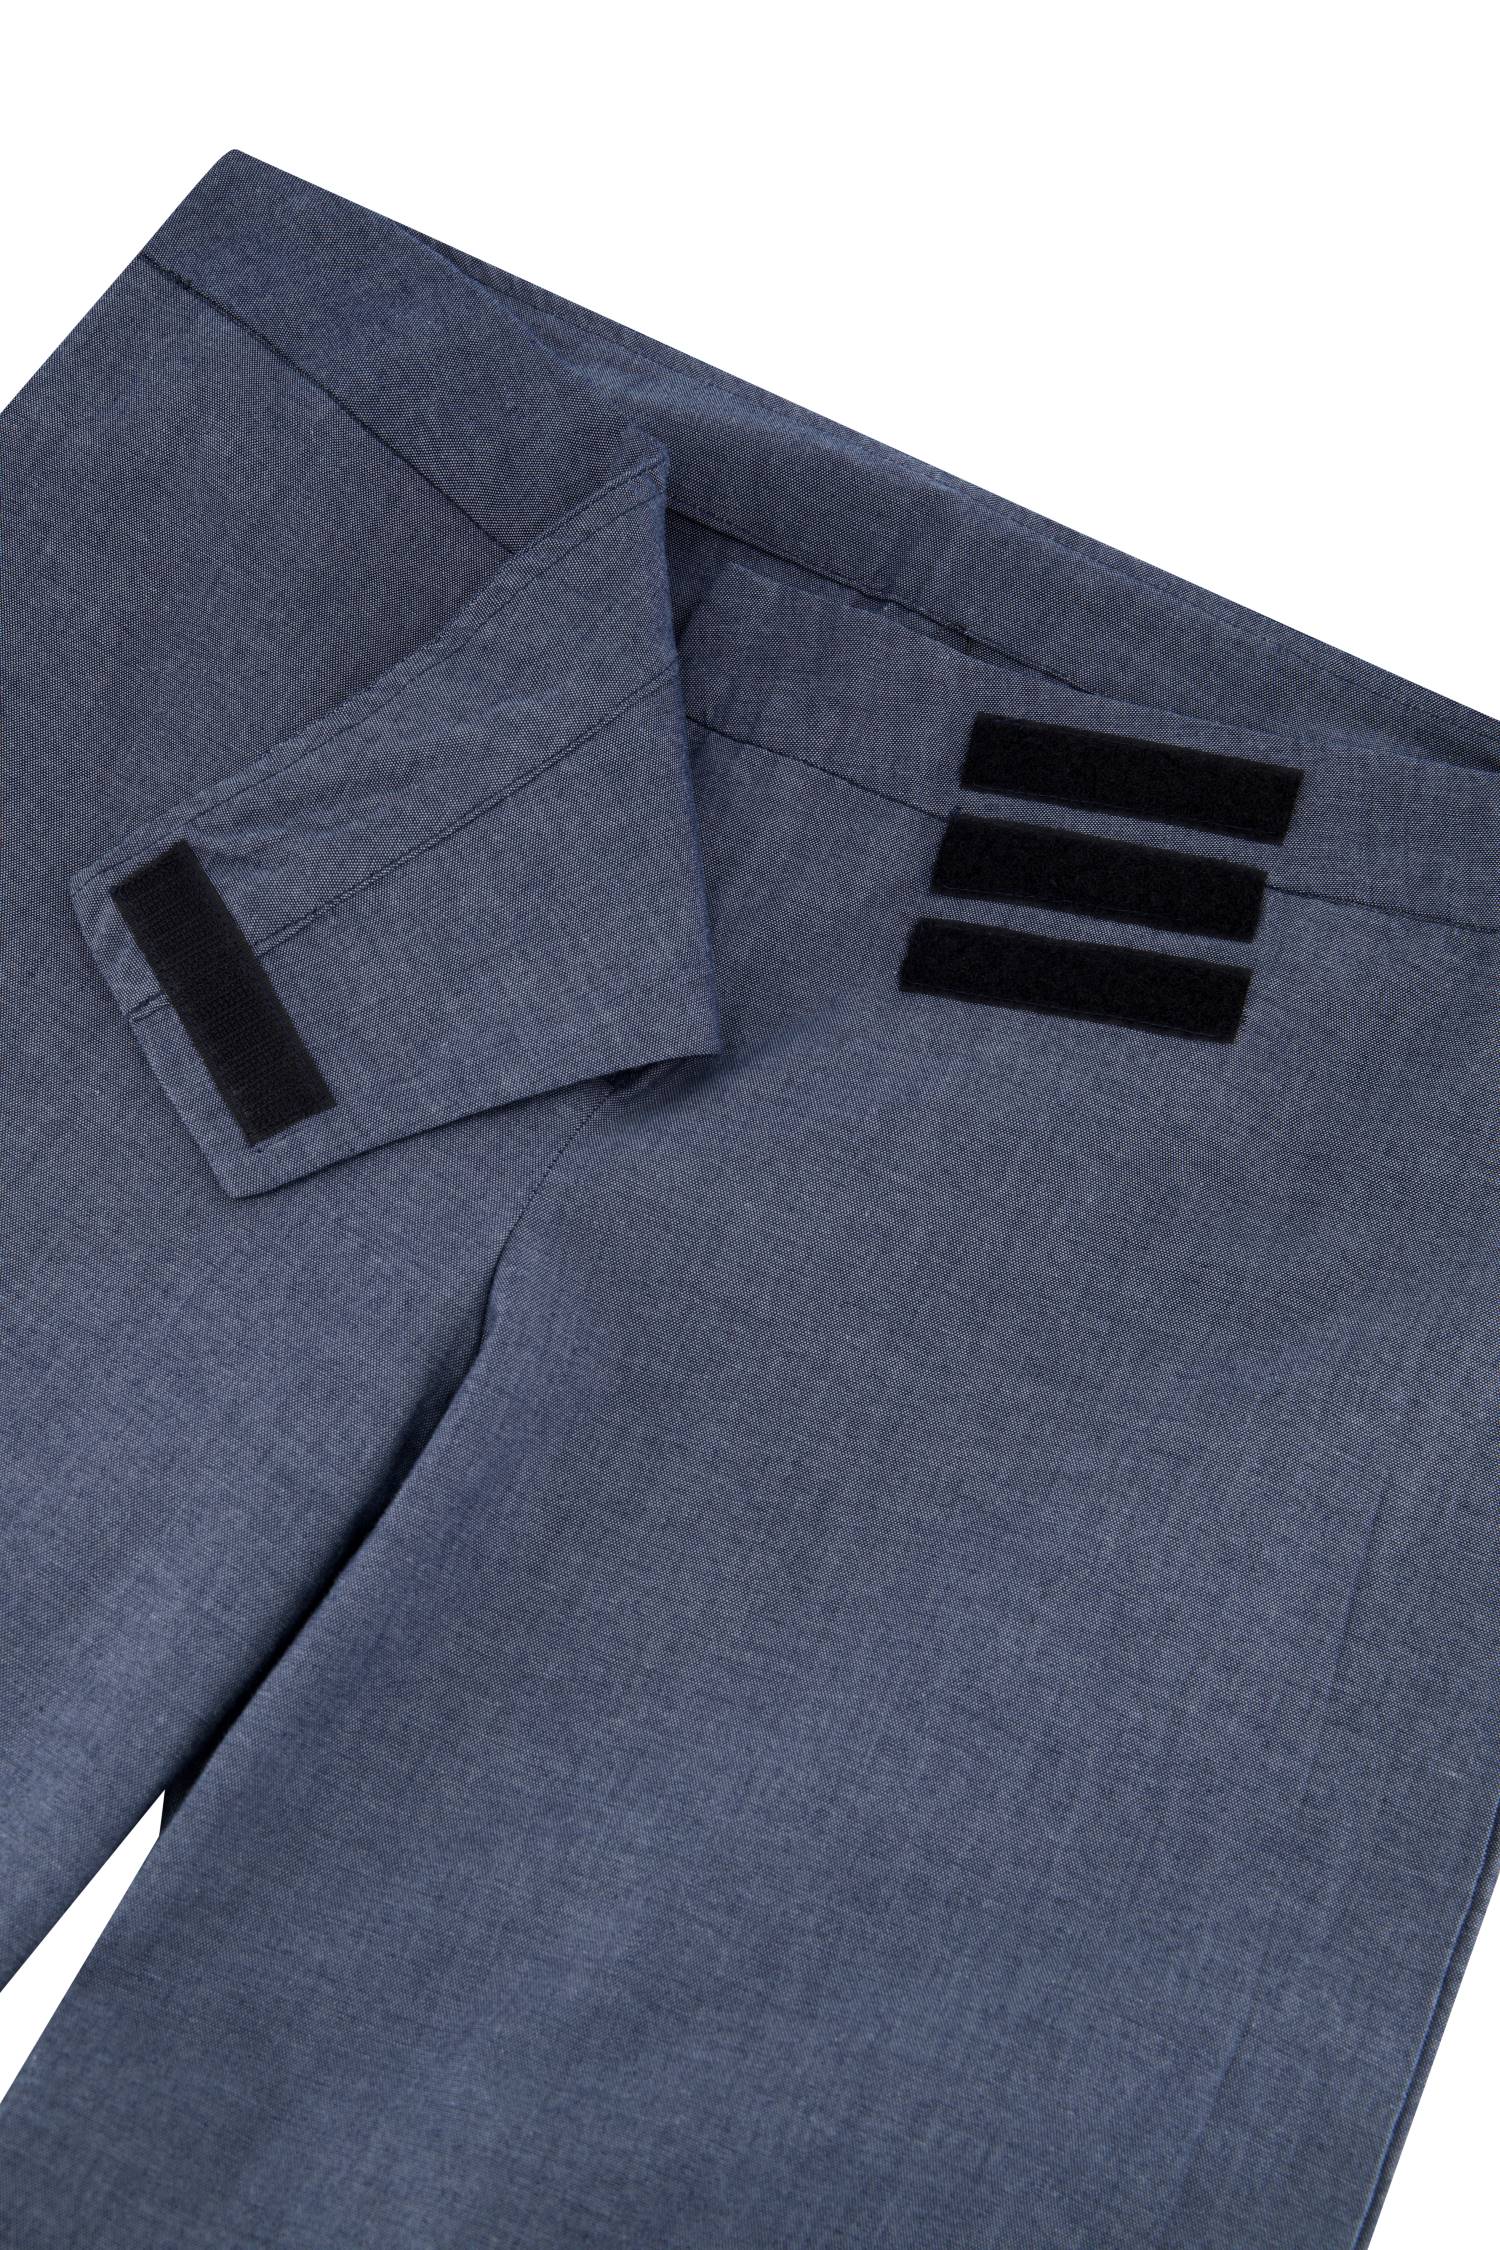 The Dress Pant-soft, easy to dress. The Shapes United.